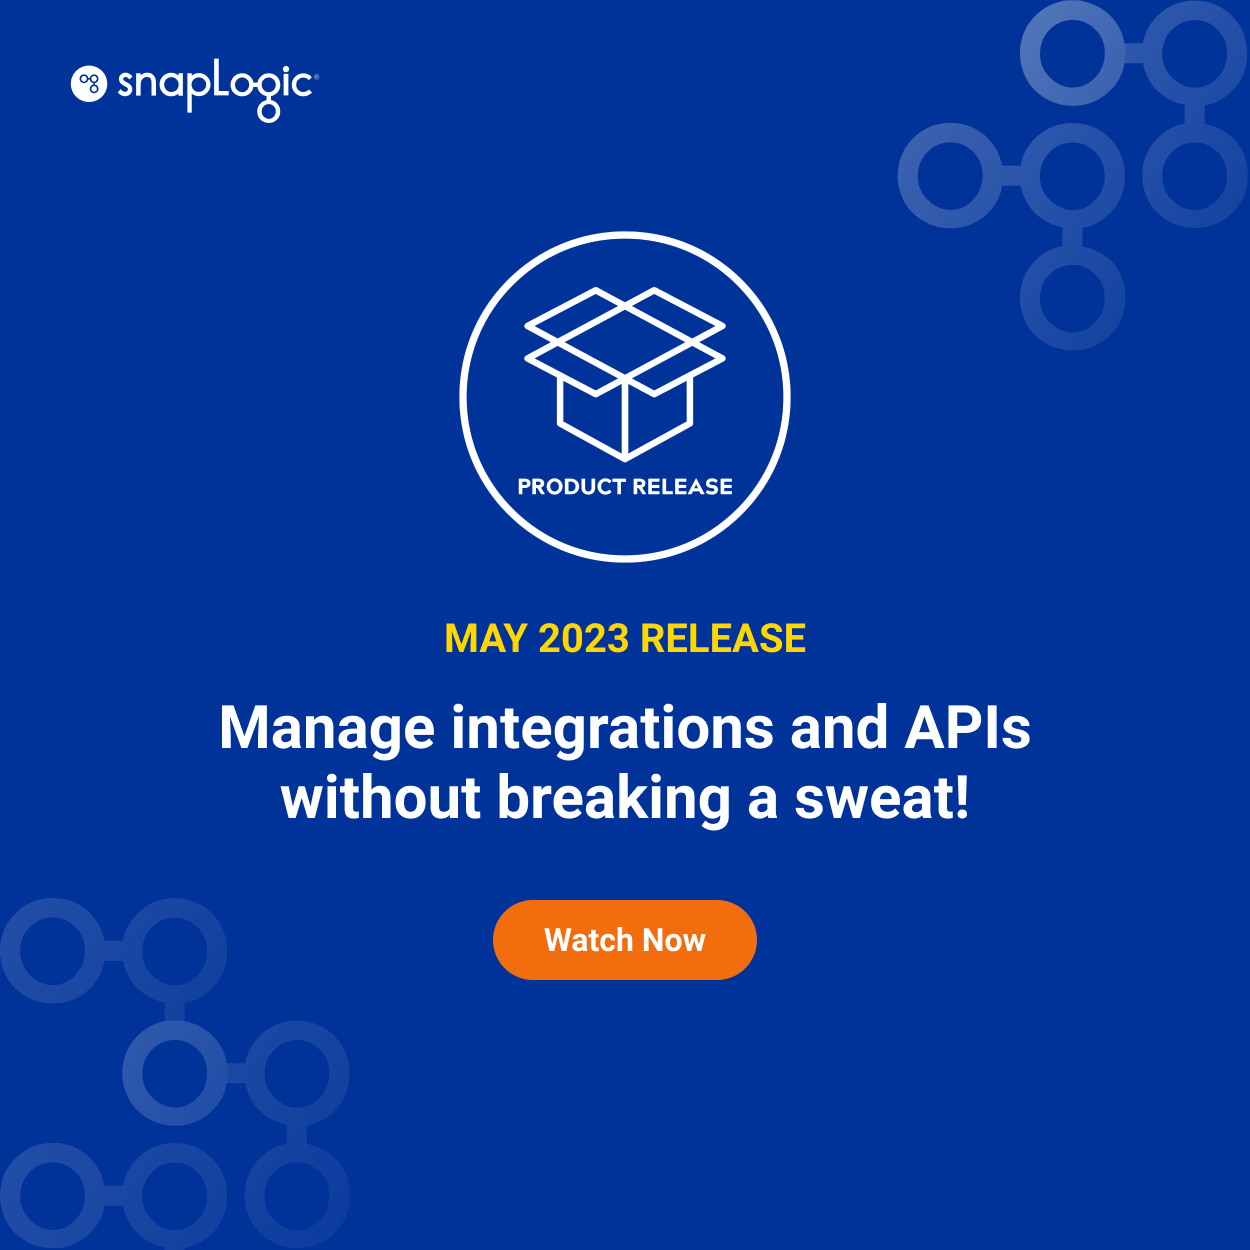 May 2023 Release: Manage integrations and APIs without breaking a sweat!